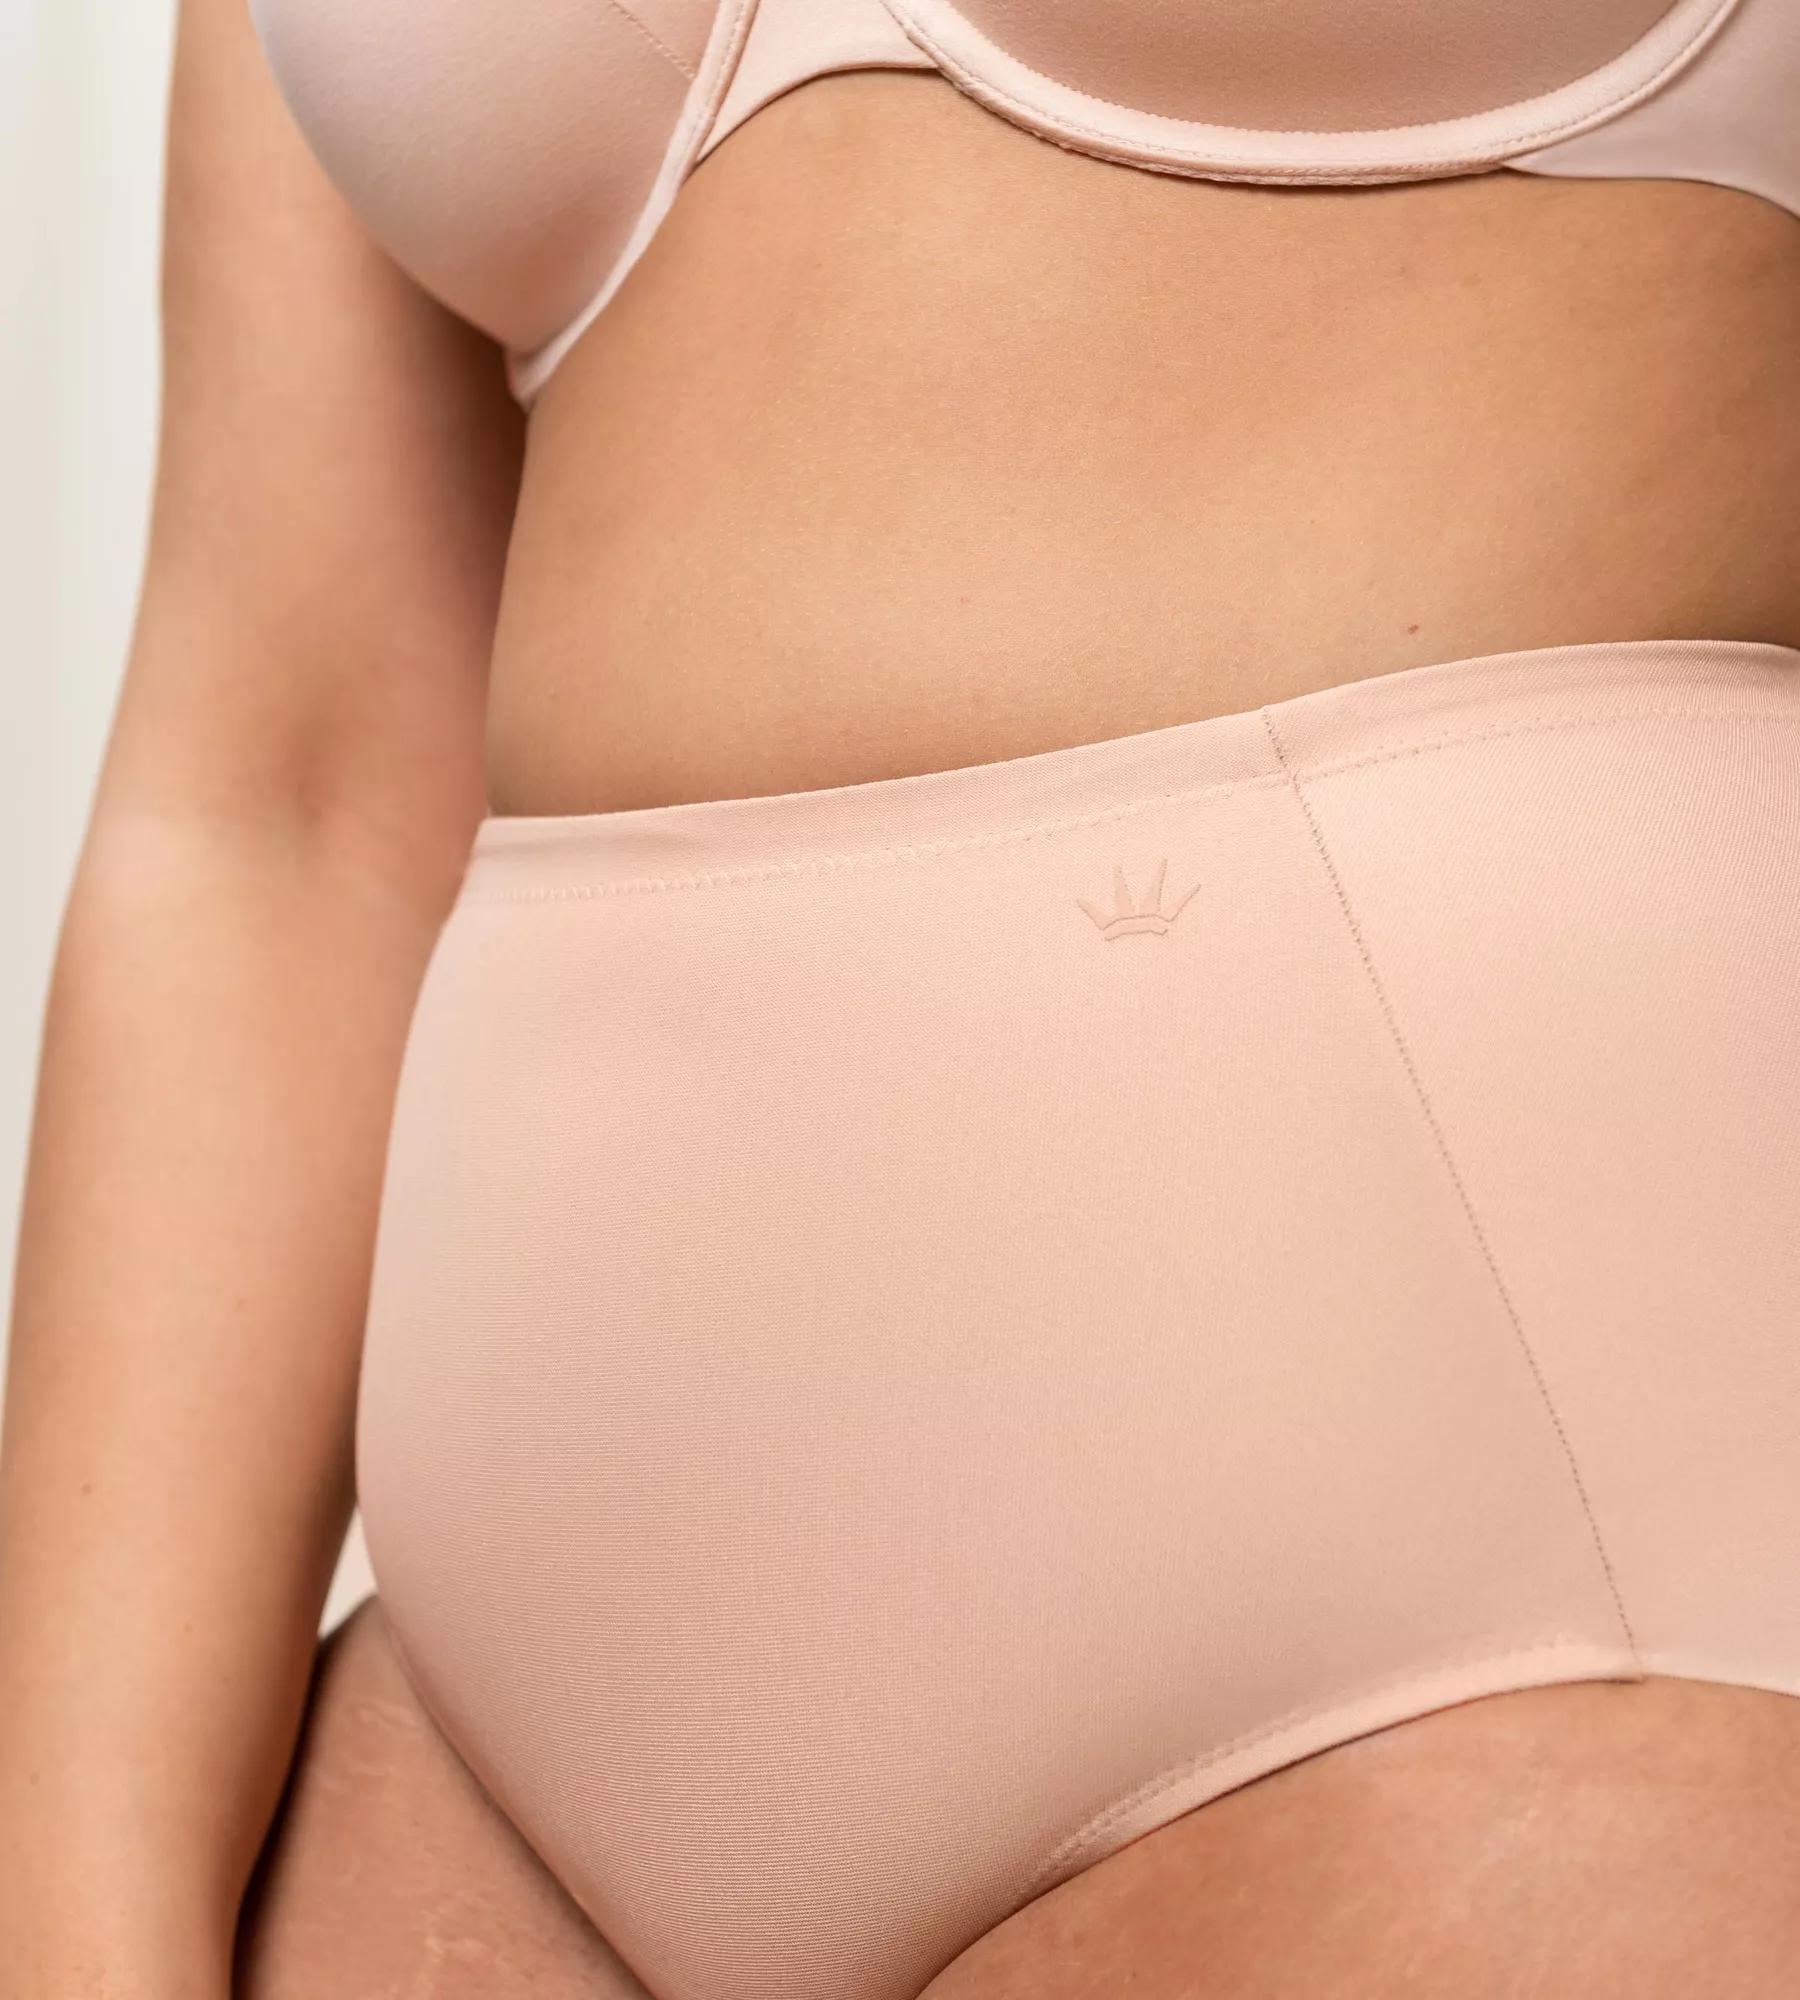 Becca Extra High + Cotton Panty (00ep Neutral Beige)